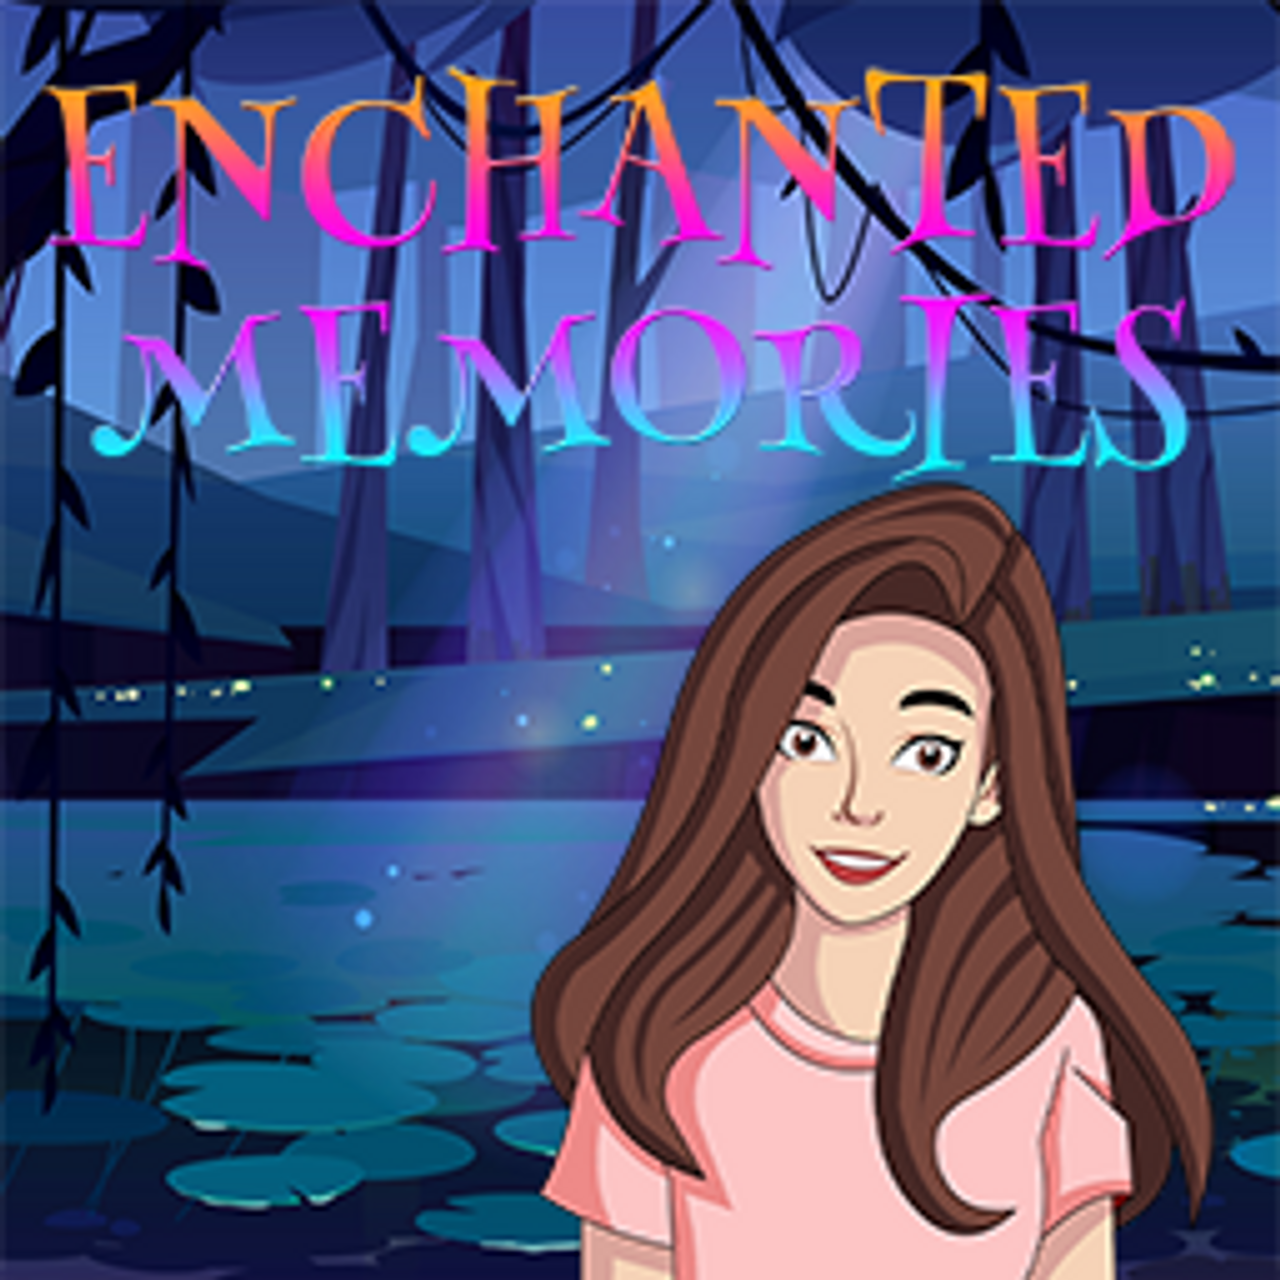 Enchanted Memories - A Freecell Journey